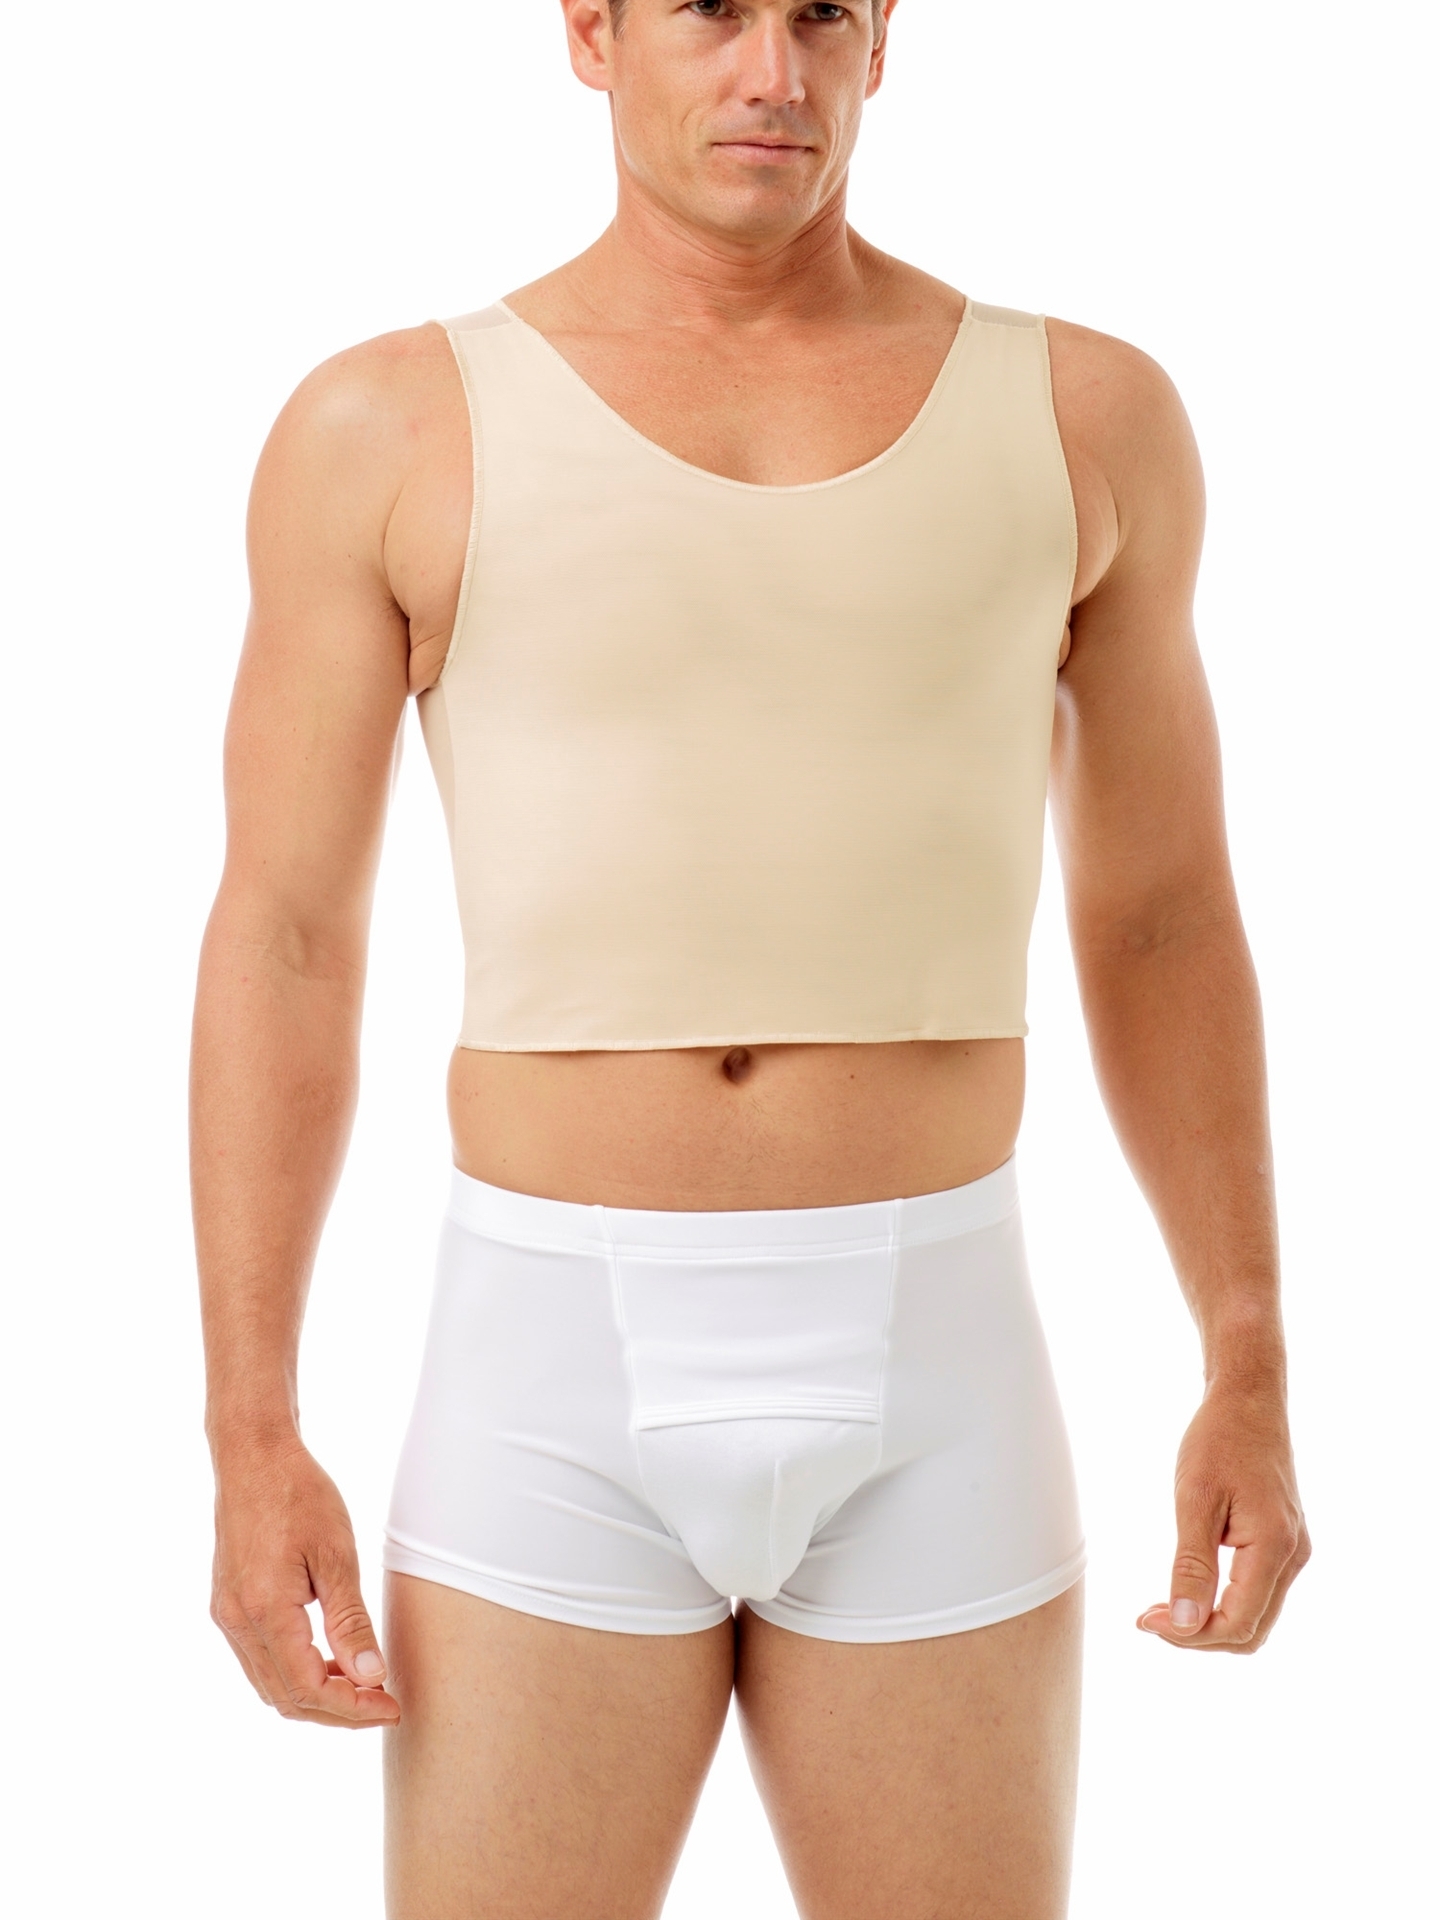 Tri-top Chest Binder - provide maximum comfortable and extreme